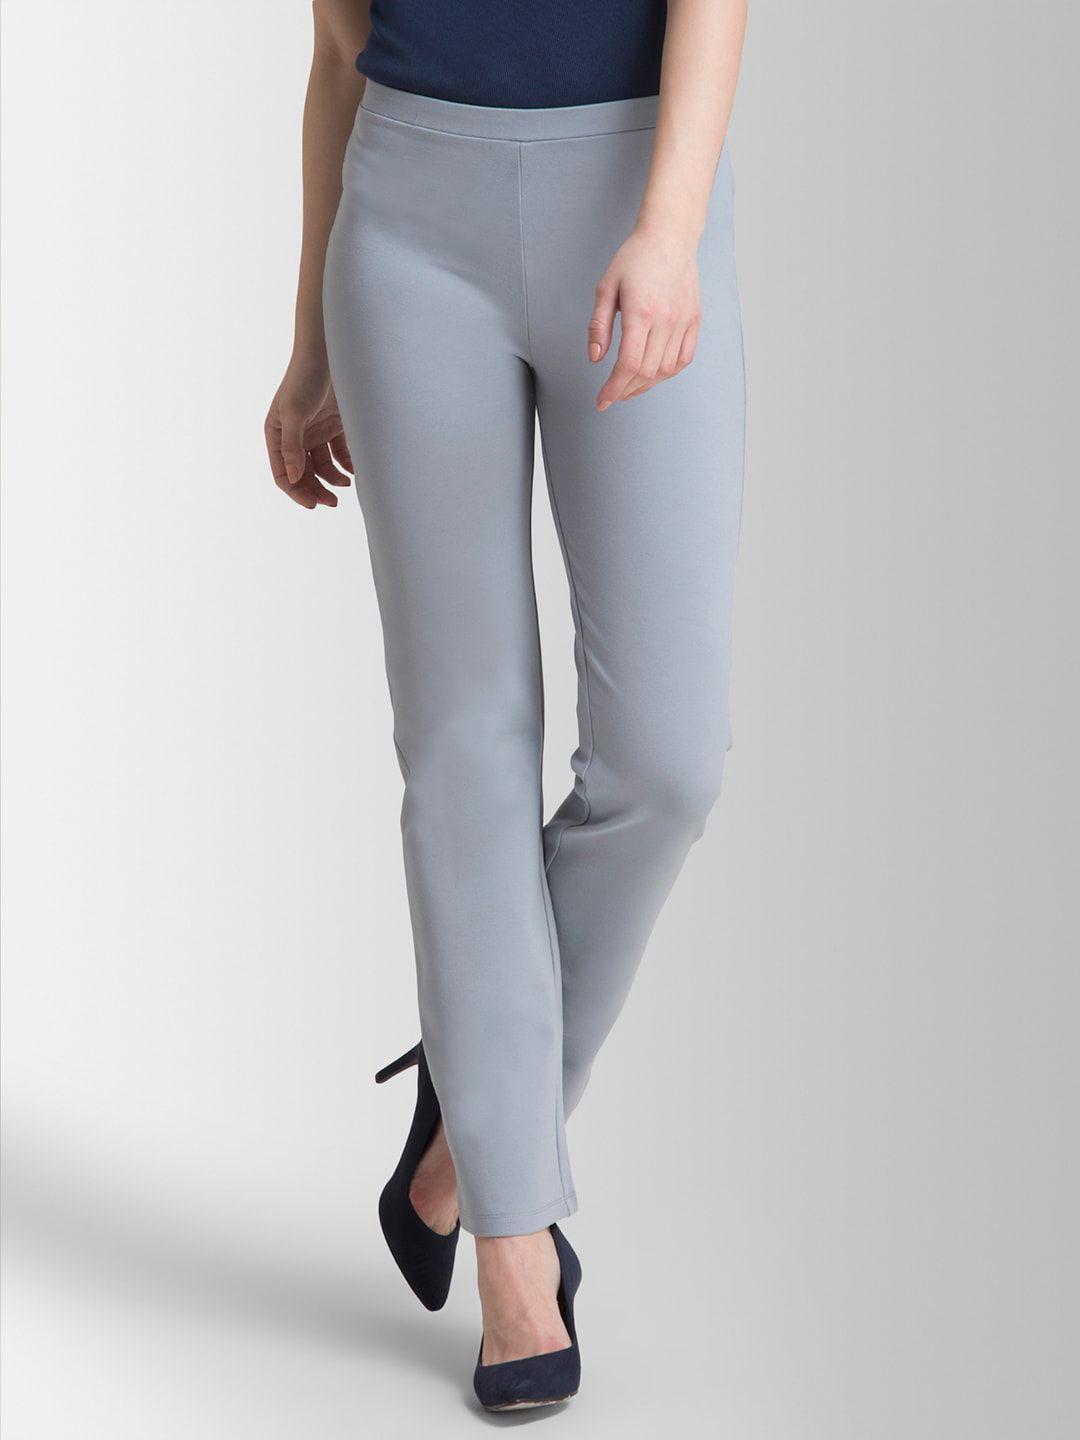 fablestreet women grey flared solid bootcut livin trousers